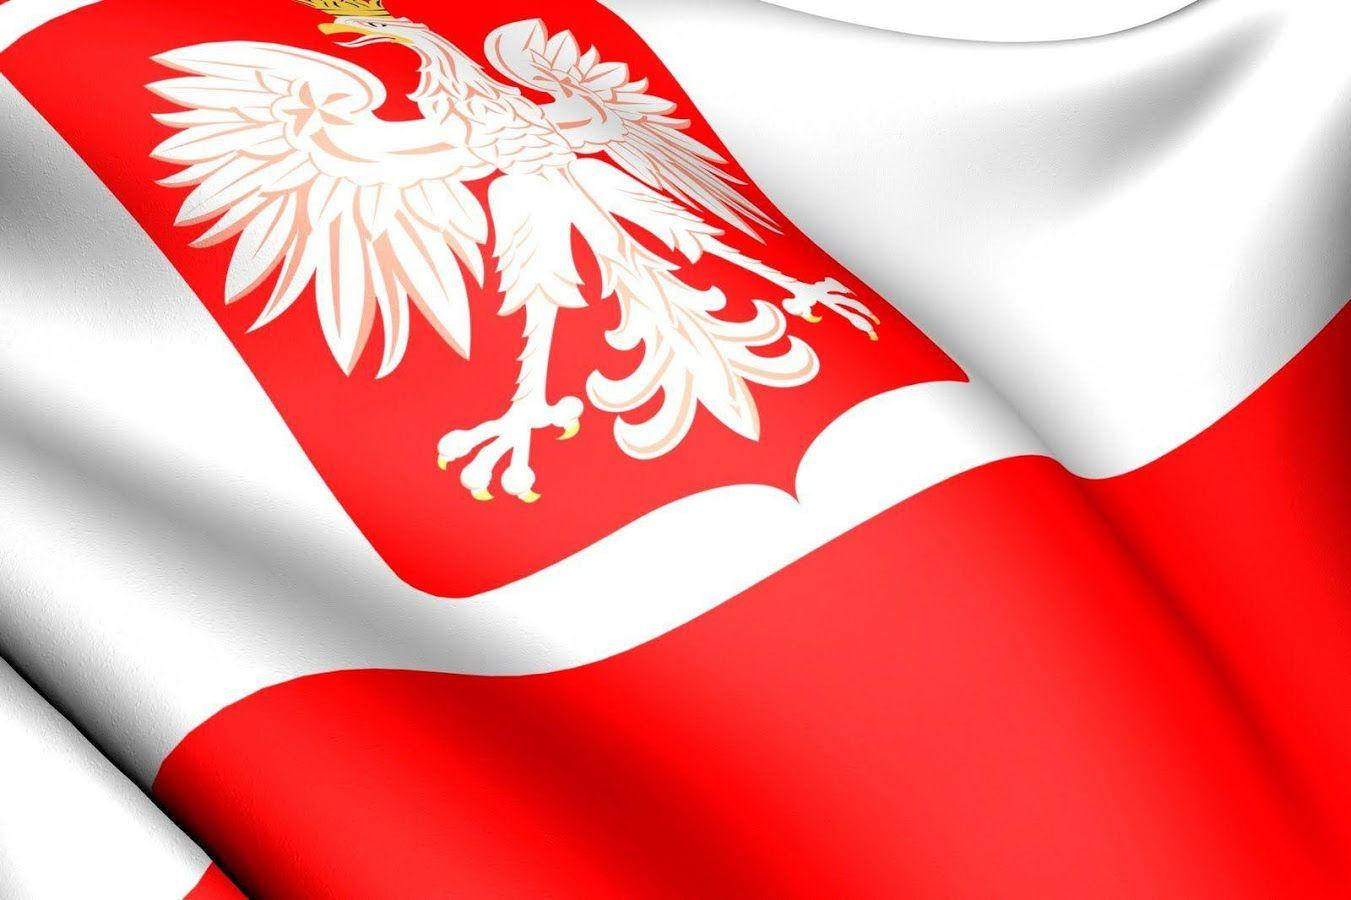 The Proud Polish Flag Fluttering In The Wind Against A Clear Blue Sky.